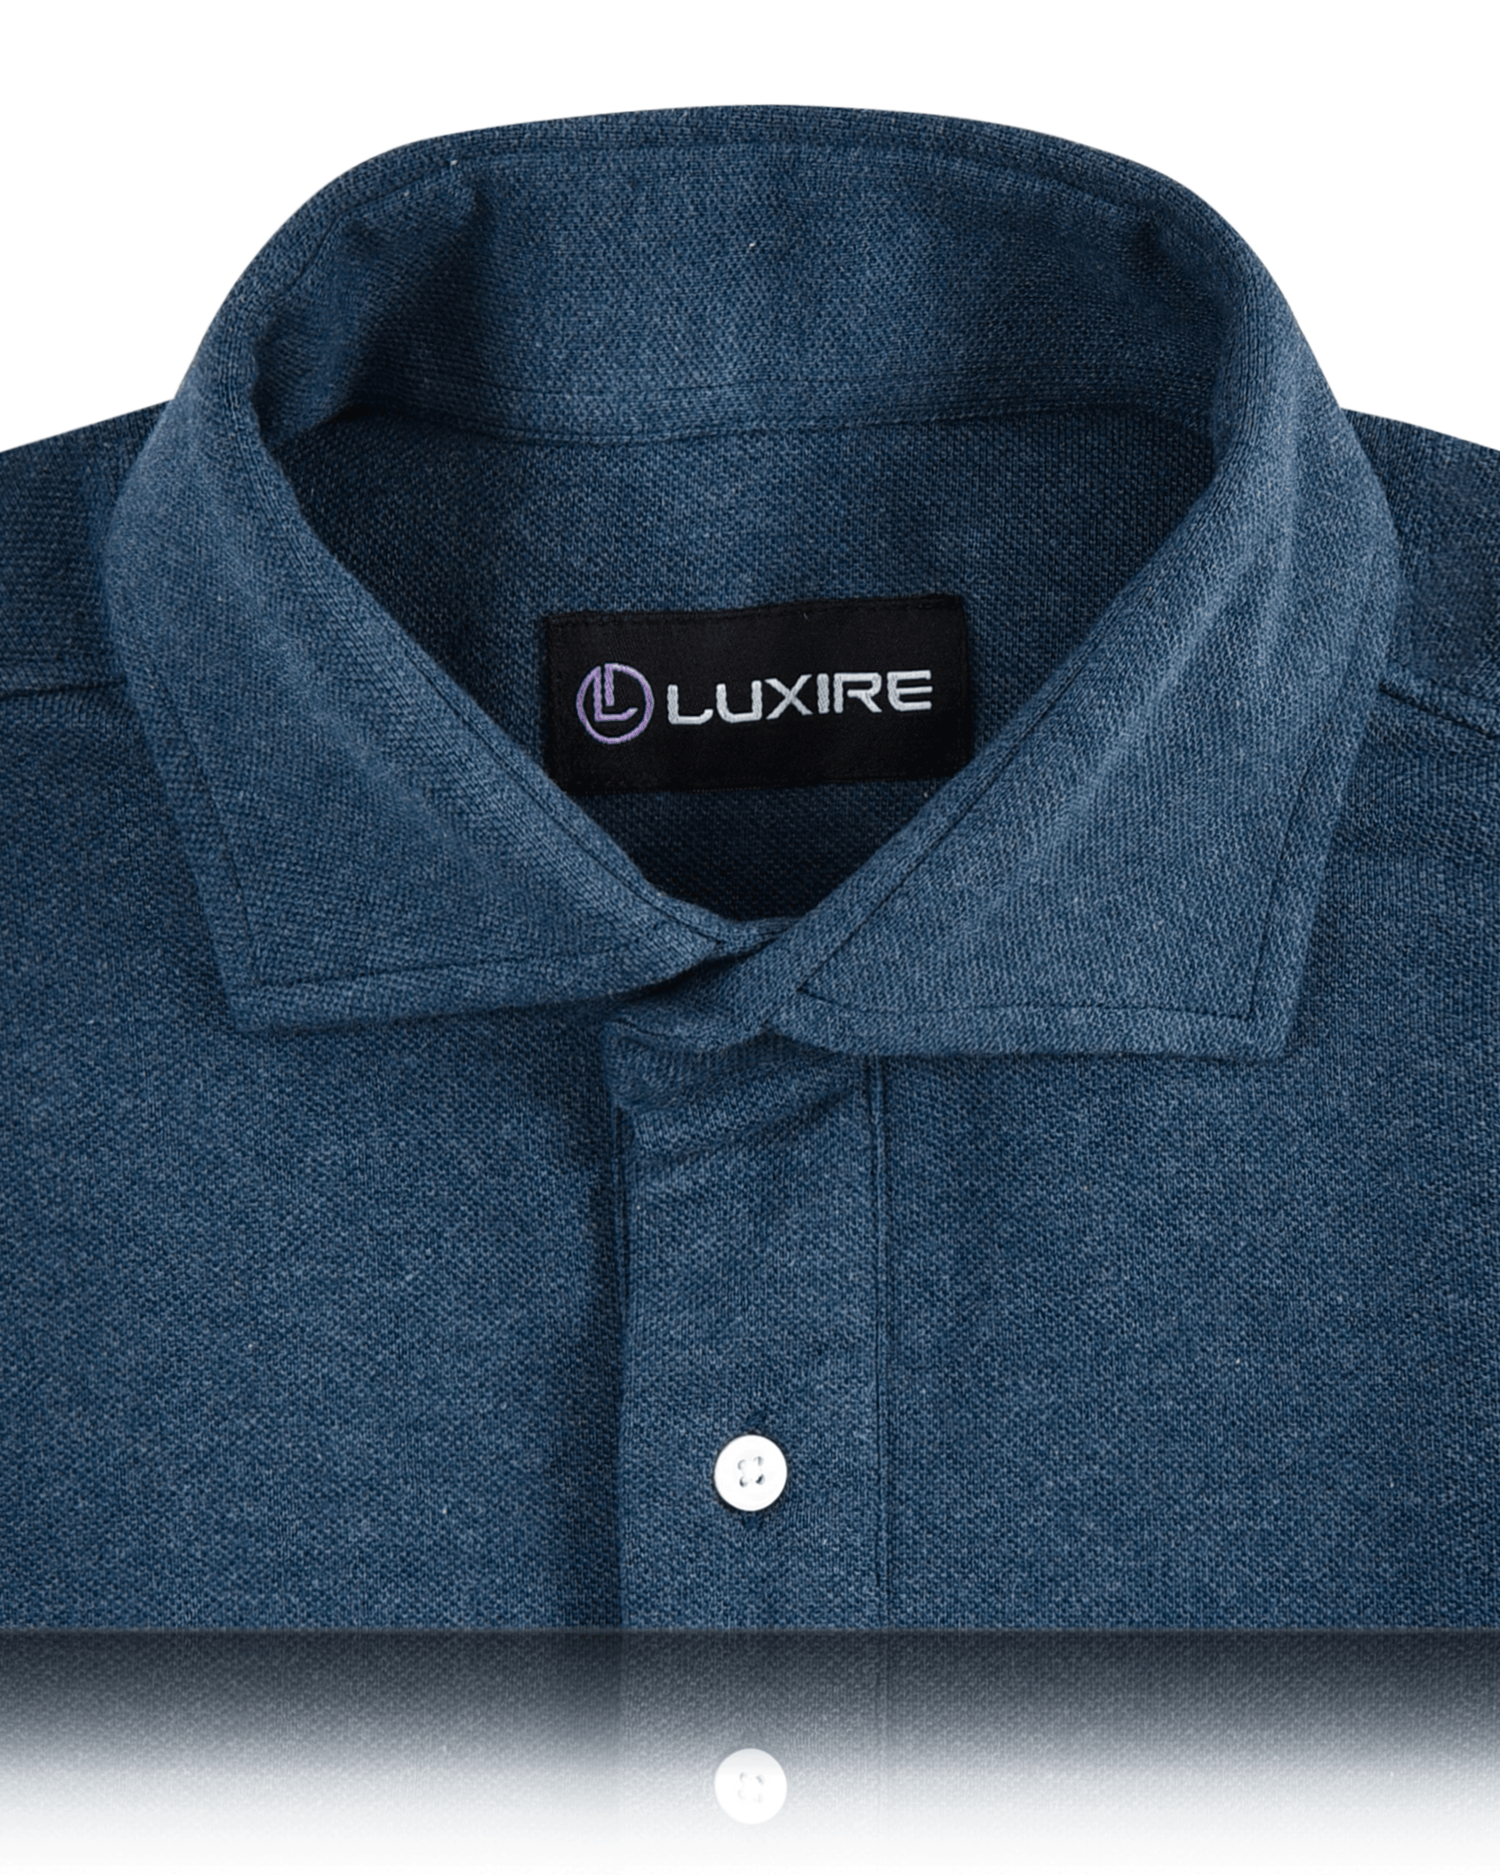 Collar of the custom oxford polo shirt for men by Luxire in dark blue grey